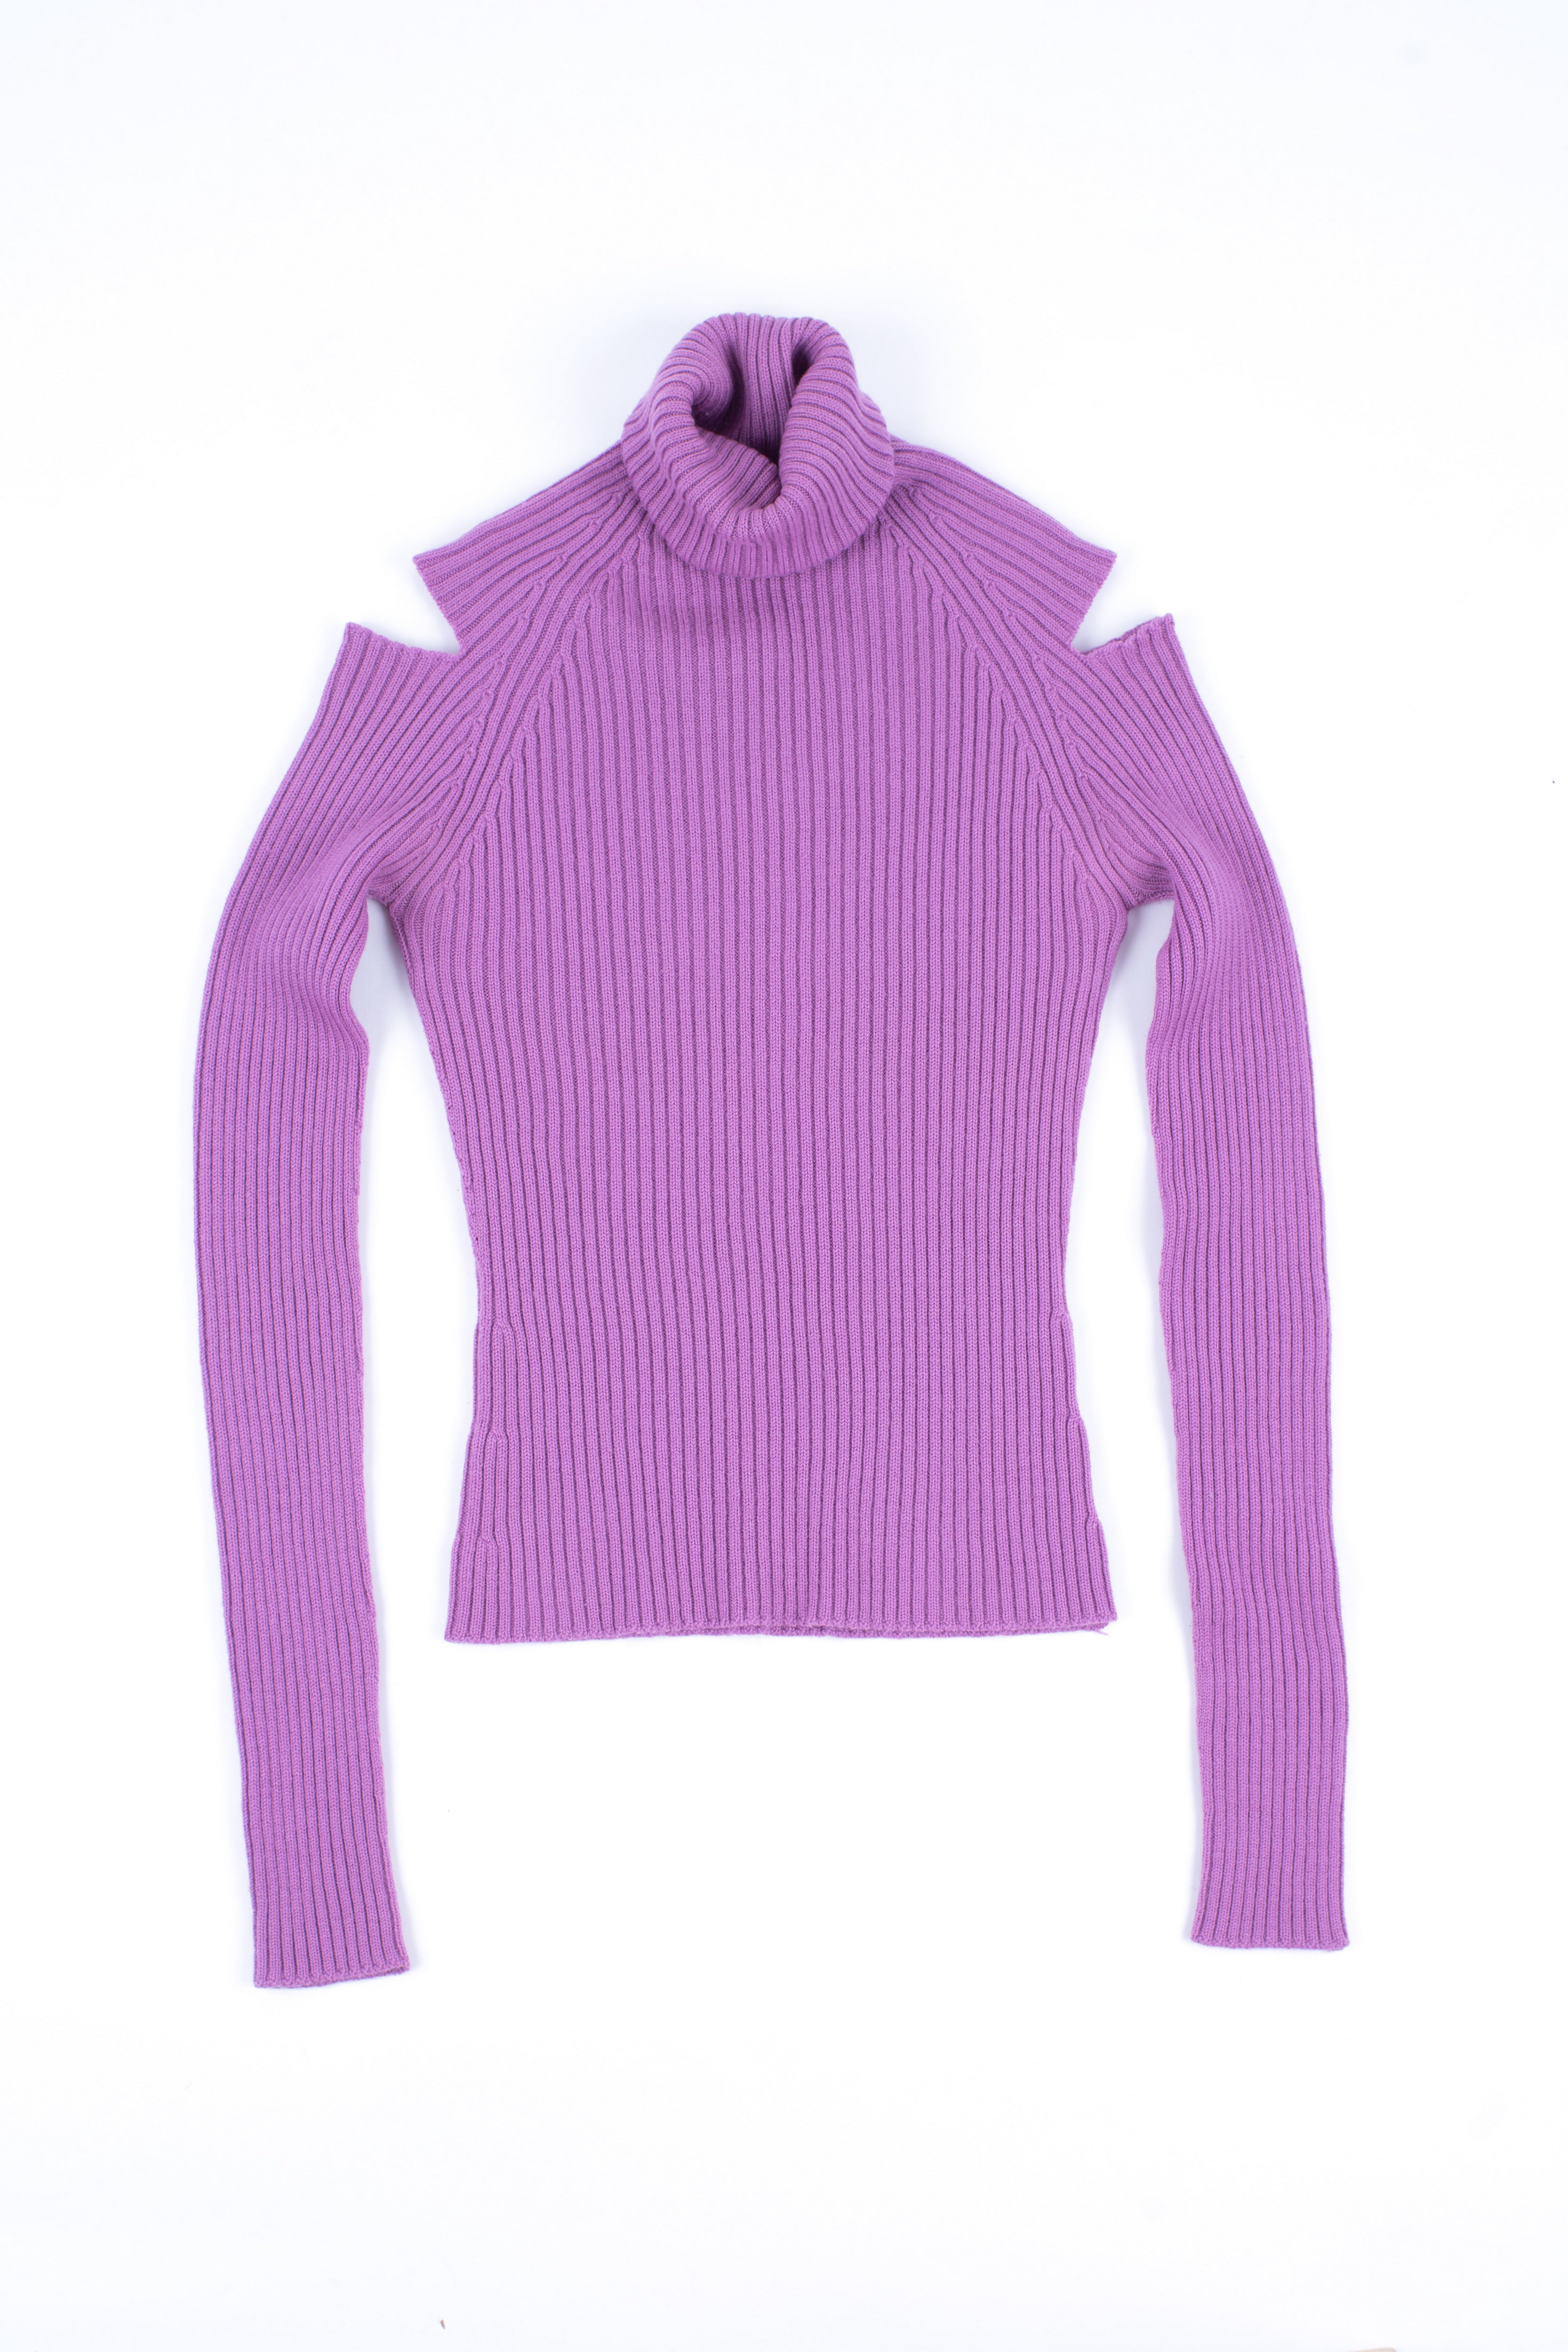 Merino Wool Lilac Turtle Neck With Cut Out Shoulders, Women's S